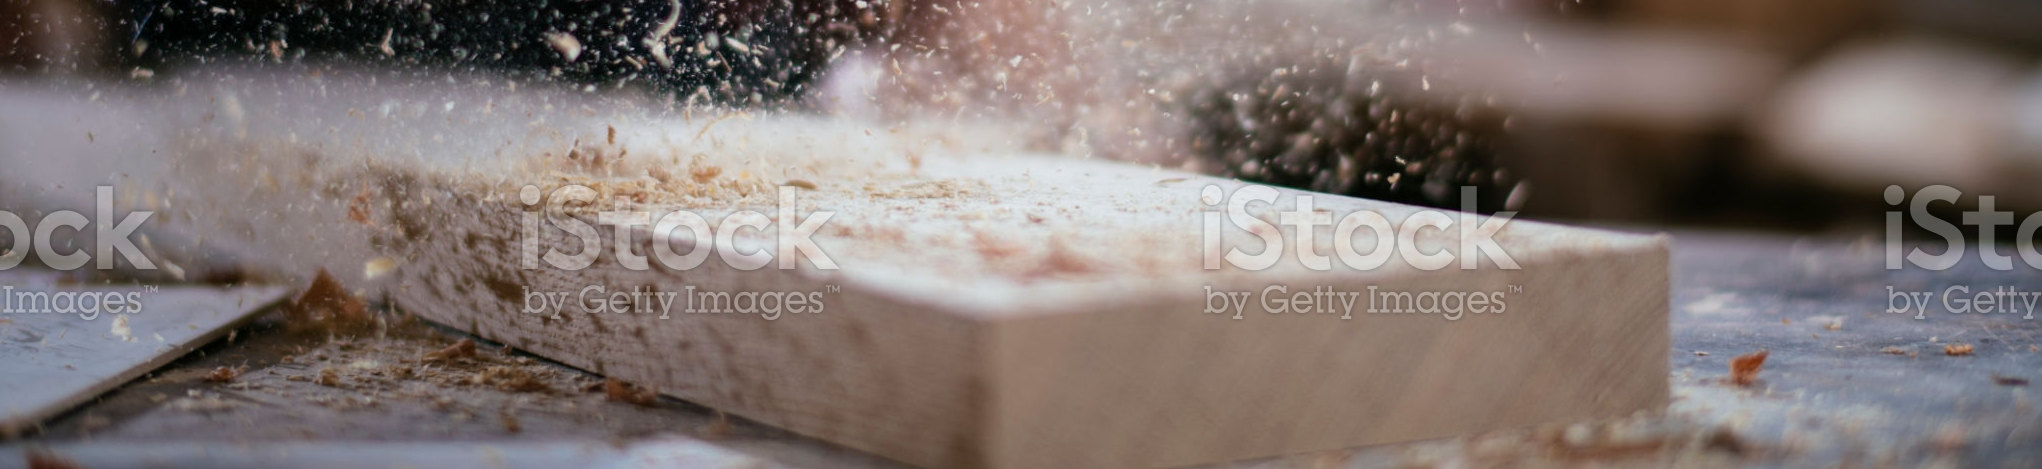 Wooden board and dust